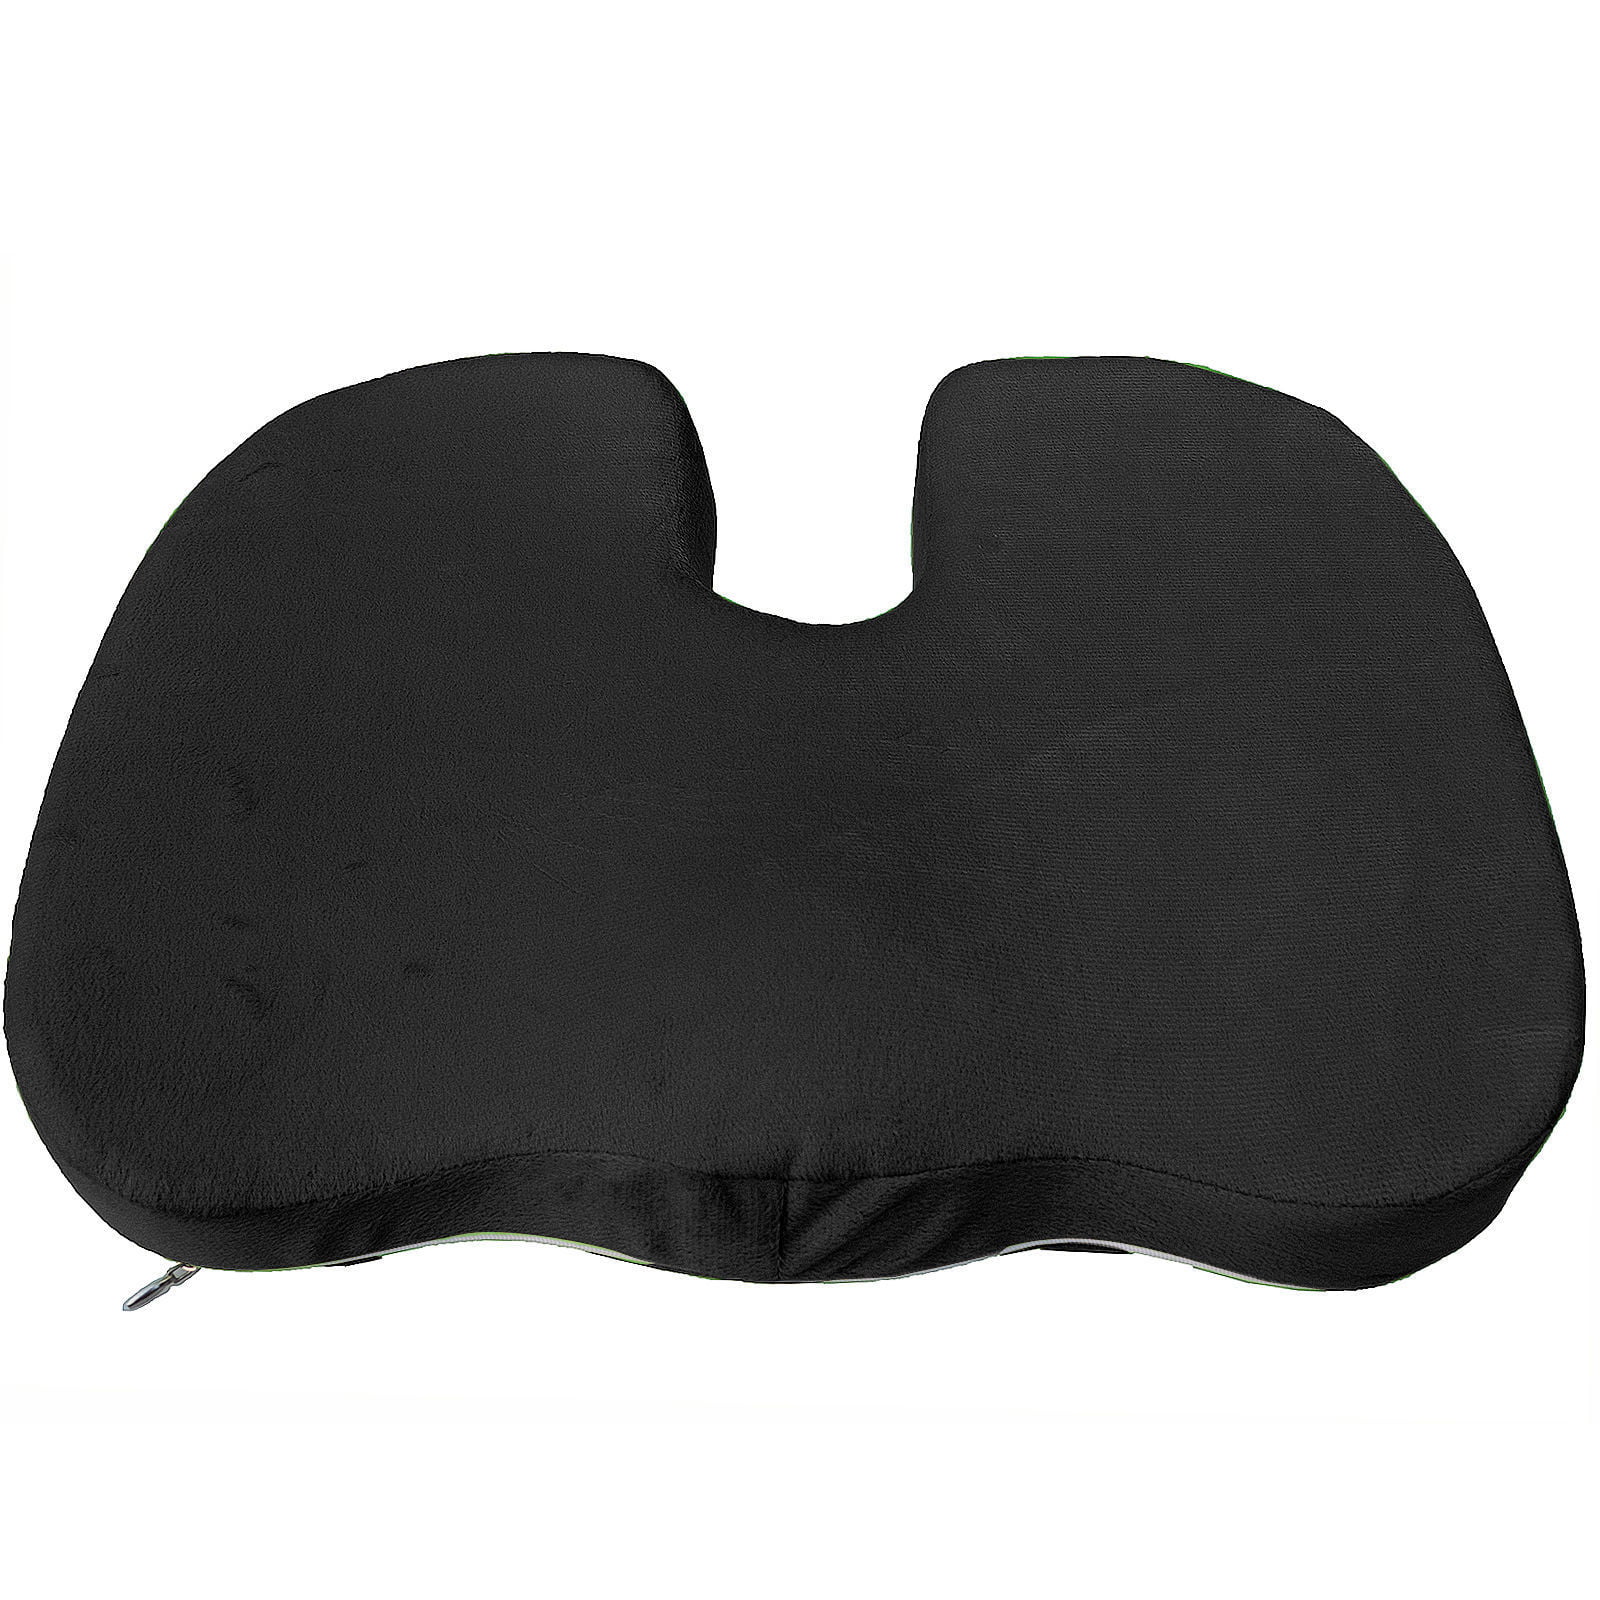 Maxphenix Memory Foam Car Seat Cushion - Coccyx & Back Pain Relief for Car, Truck, Office - Black, Size: 18 x 17 x 2.5